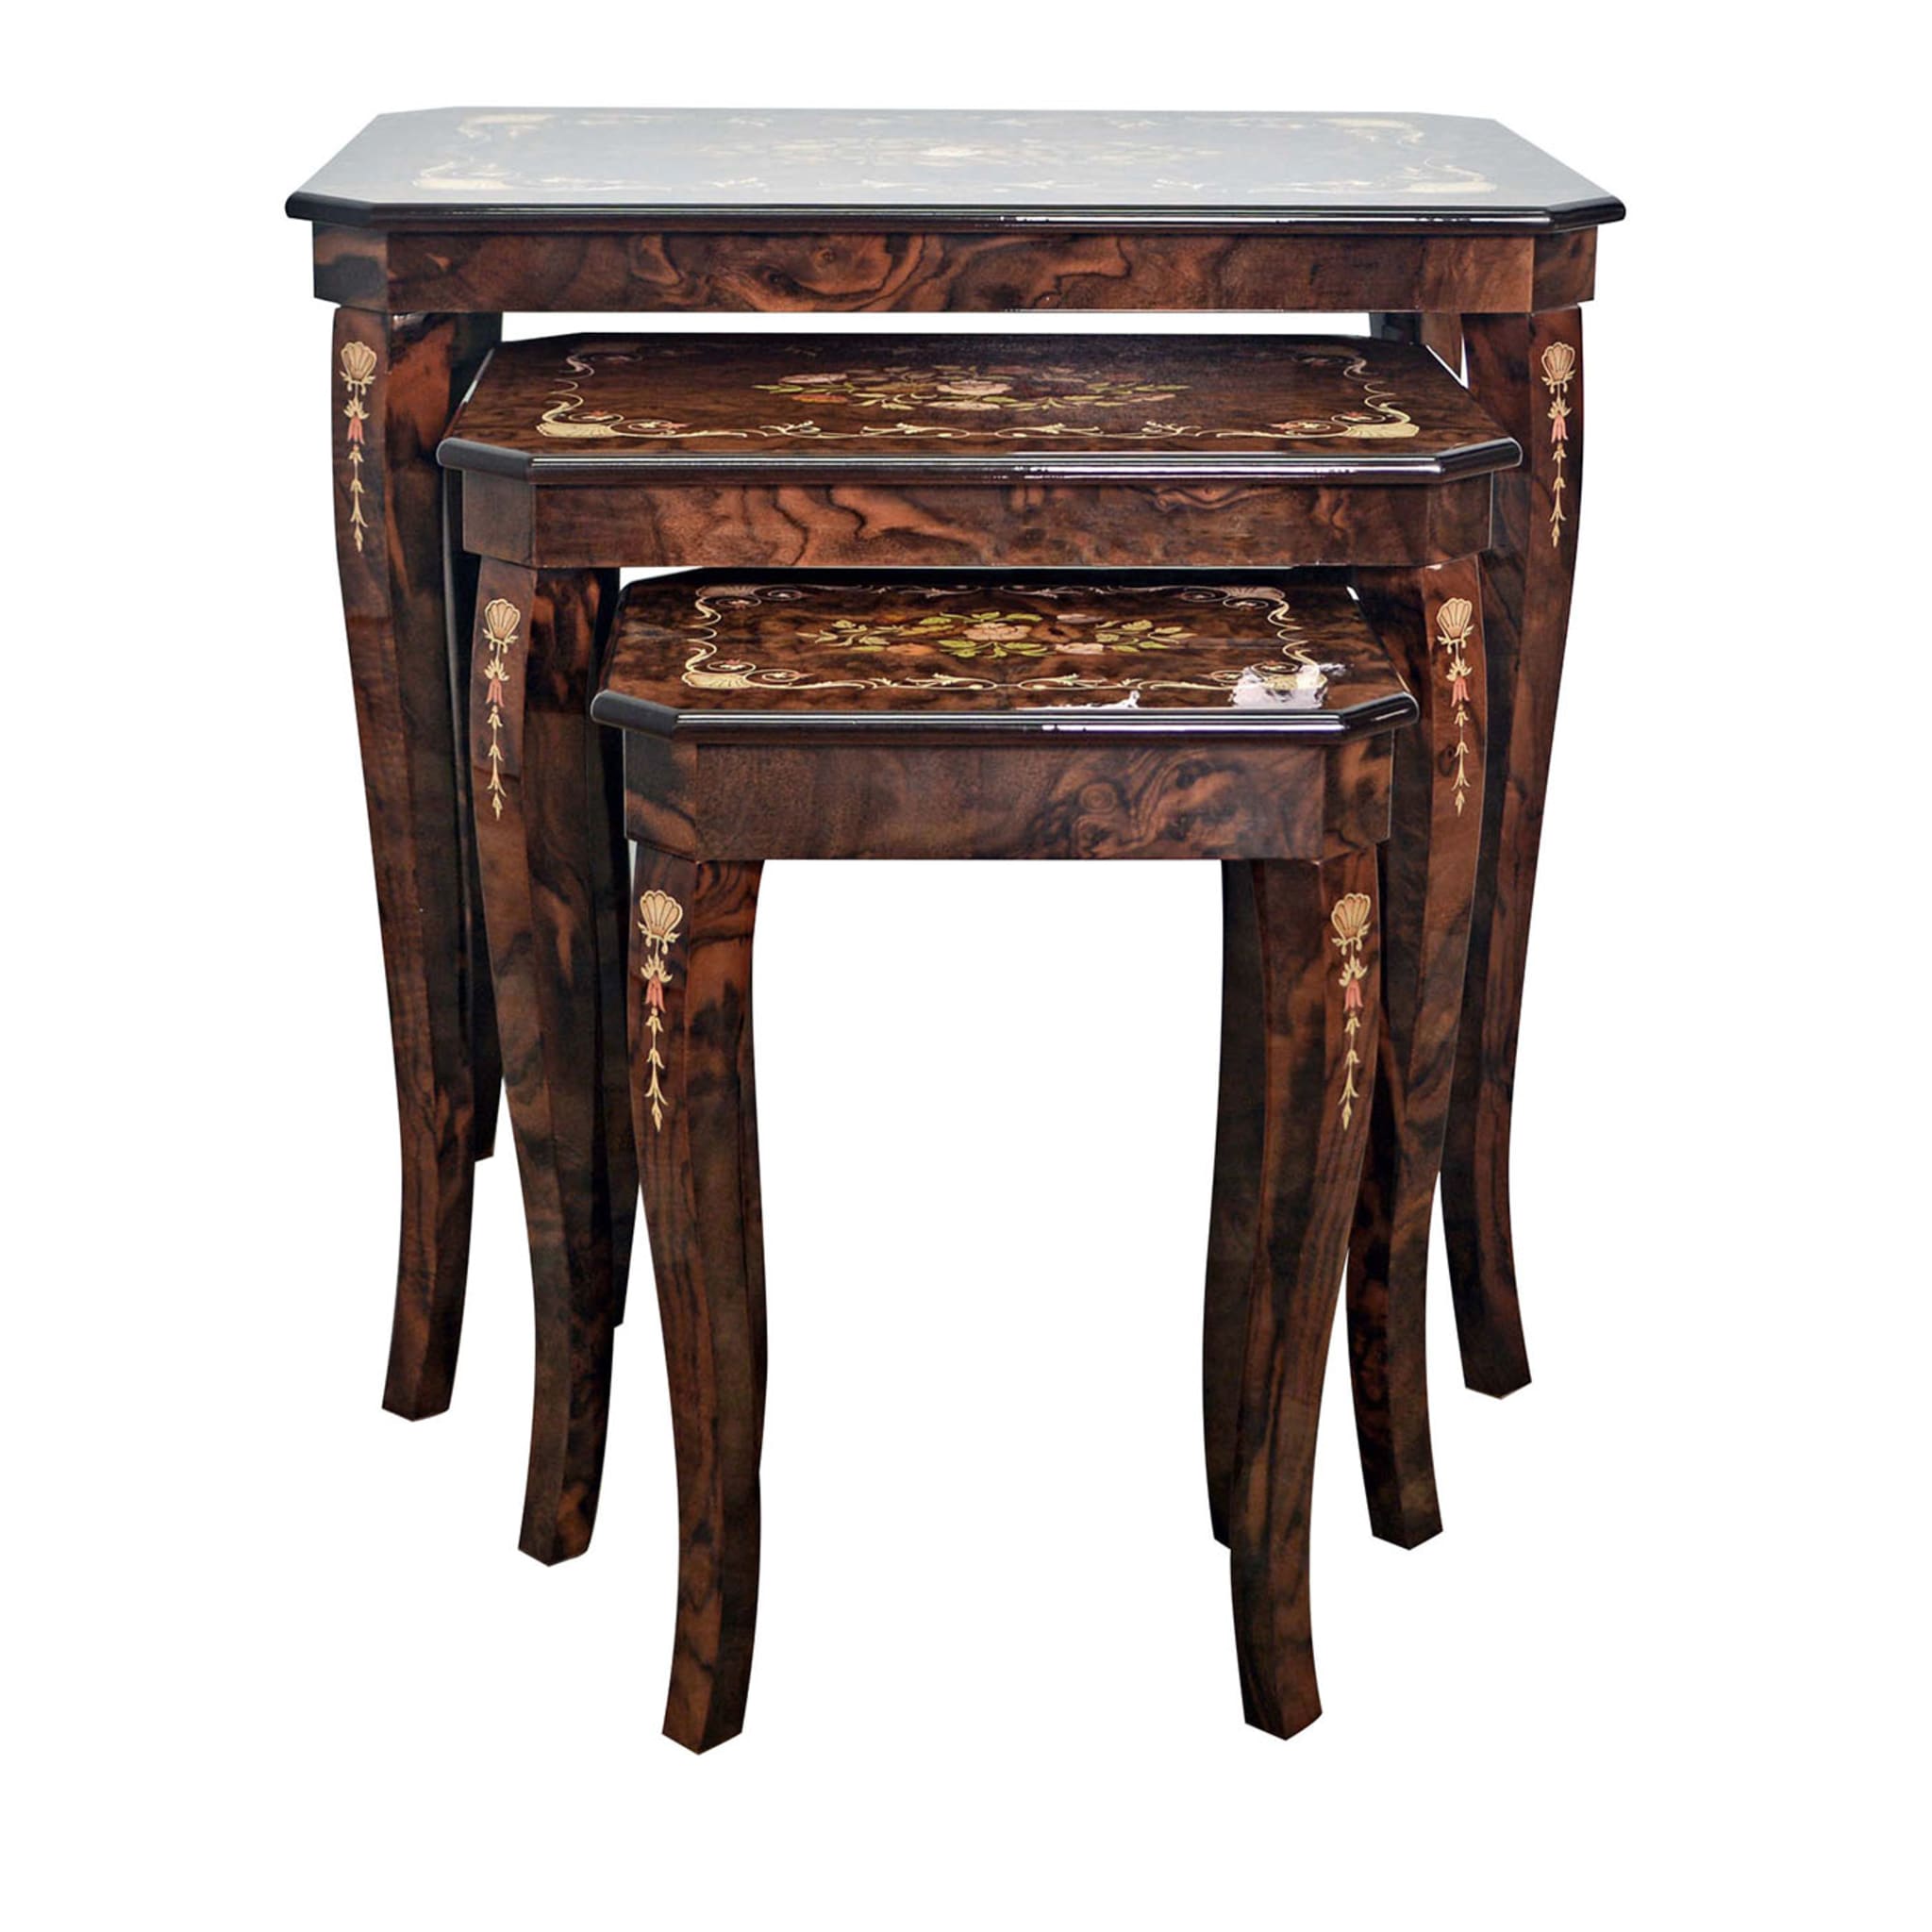 Set of 3 Musical Floral Walnut Briar Nesting Tables #2 - Main view